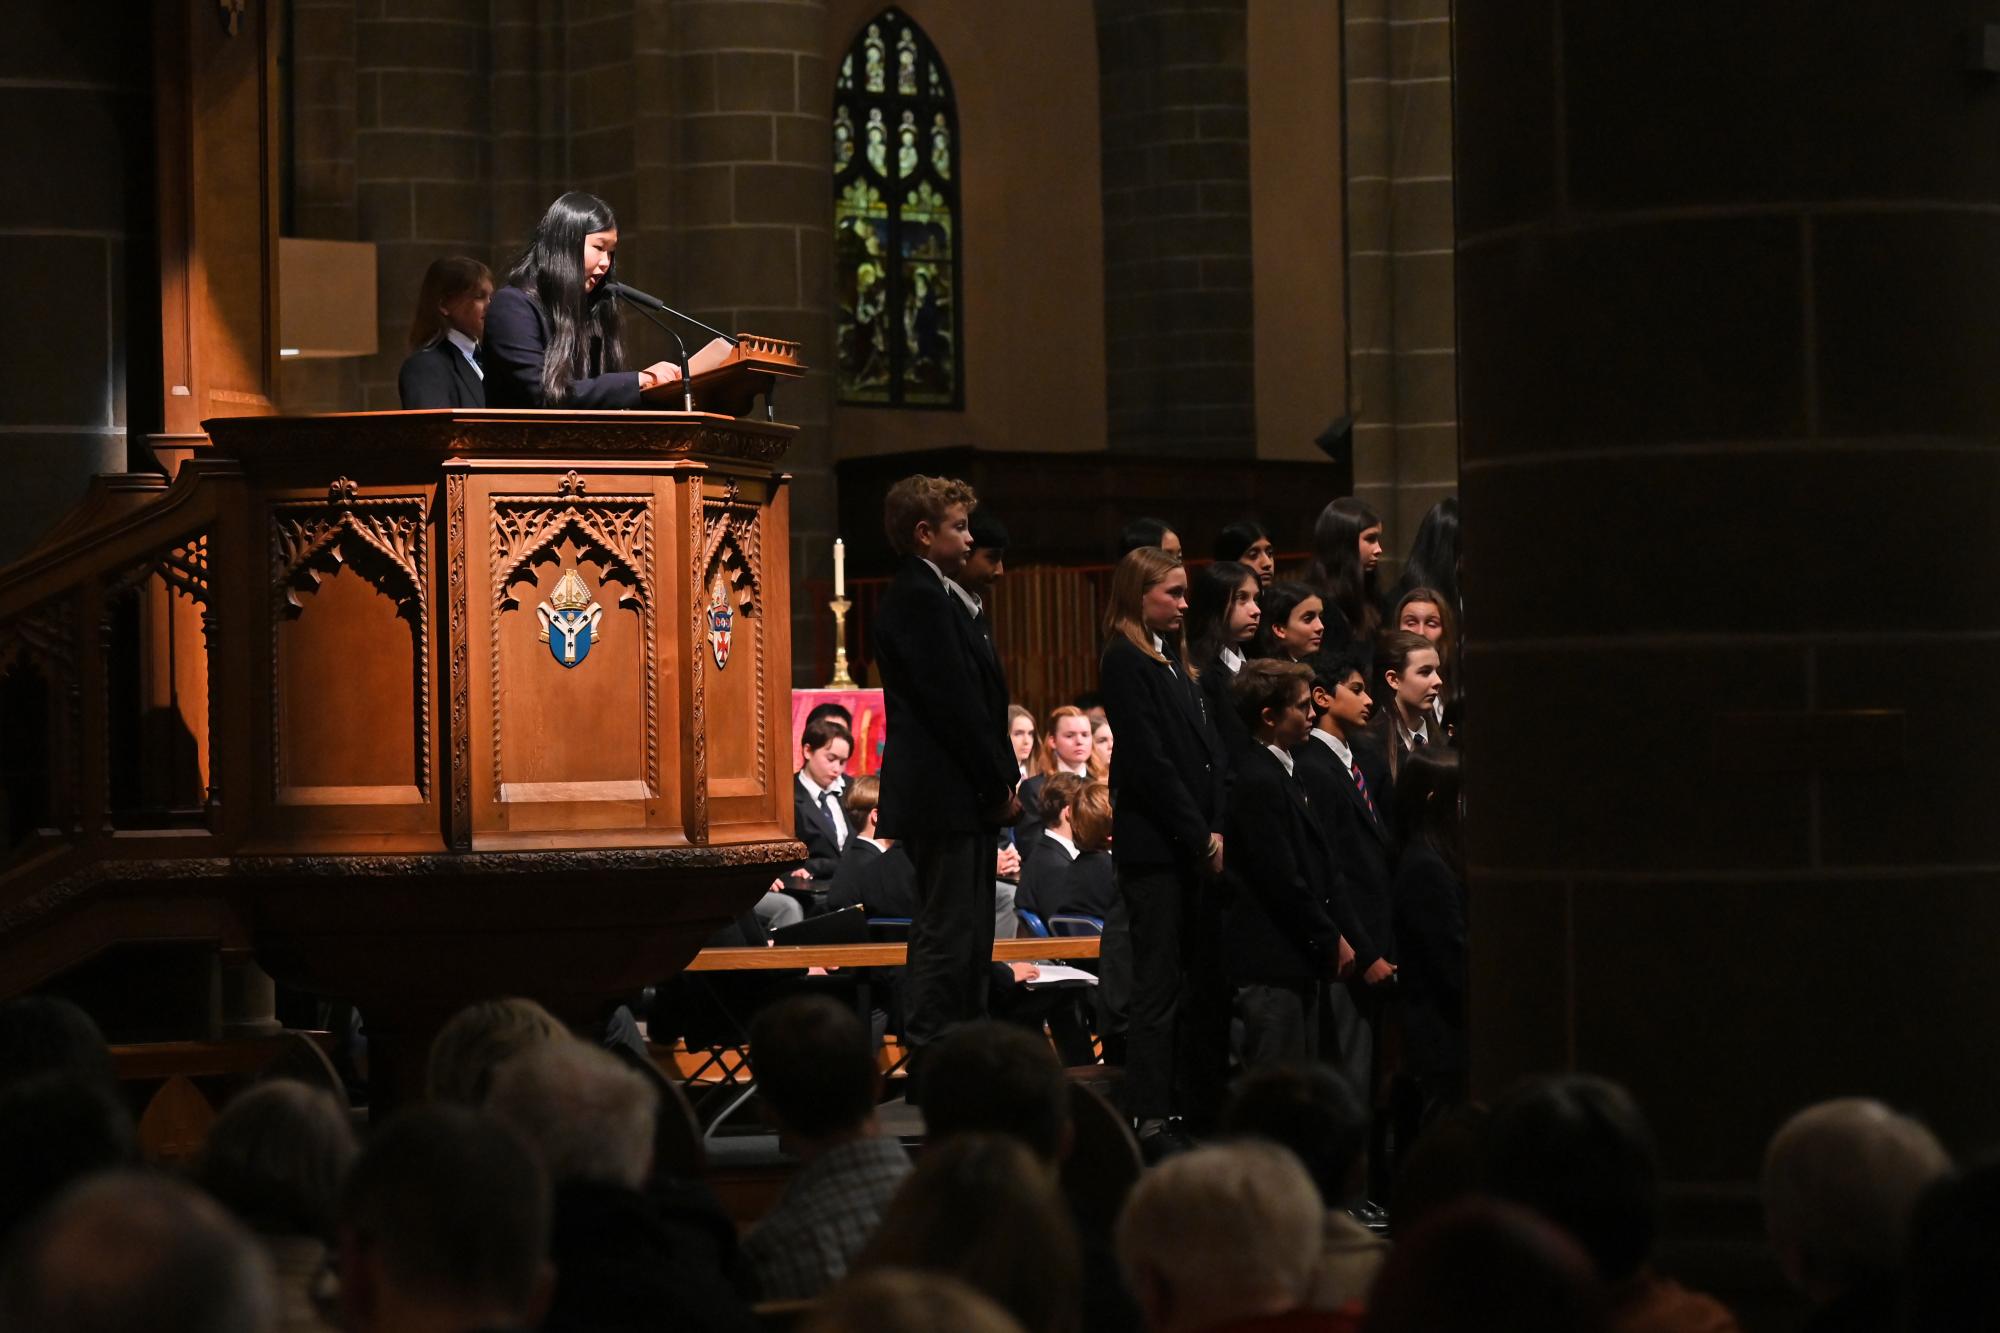 A Middle School student reads a reflection during the Carol Service at Christ Church Cathedral